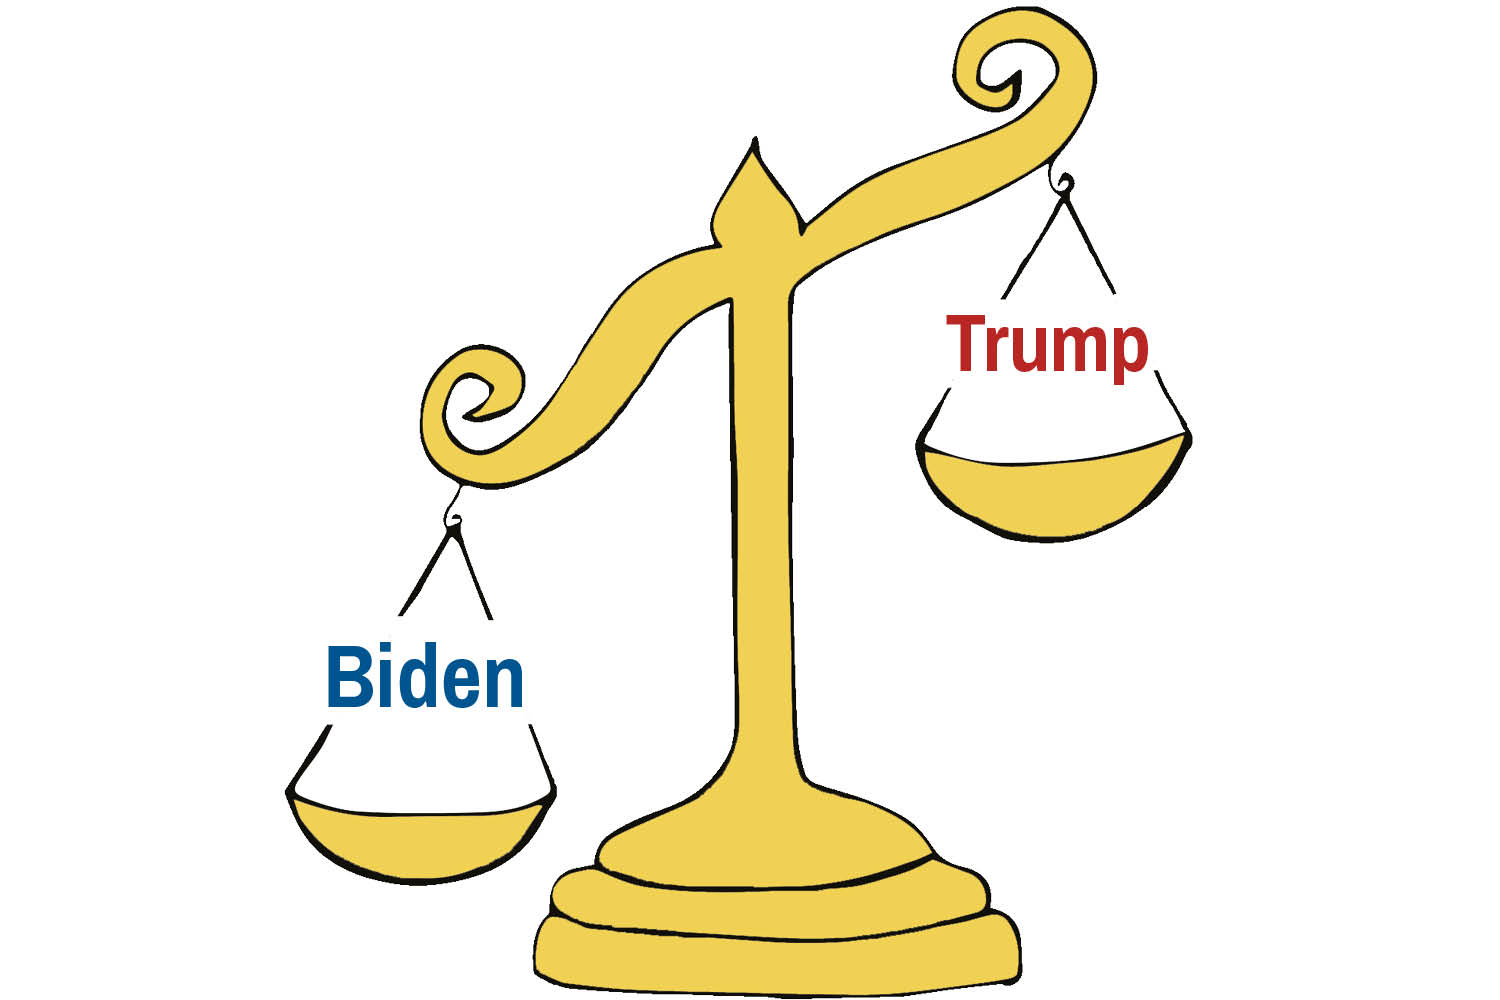 Republican and democratic students discuss voting for Biden because he is the lesser of two evils, rather than as their preferred candidate. 